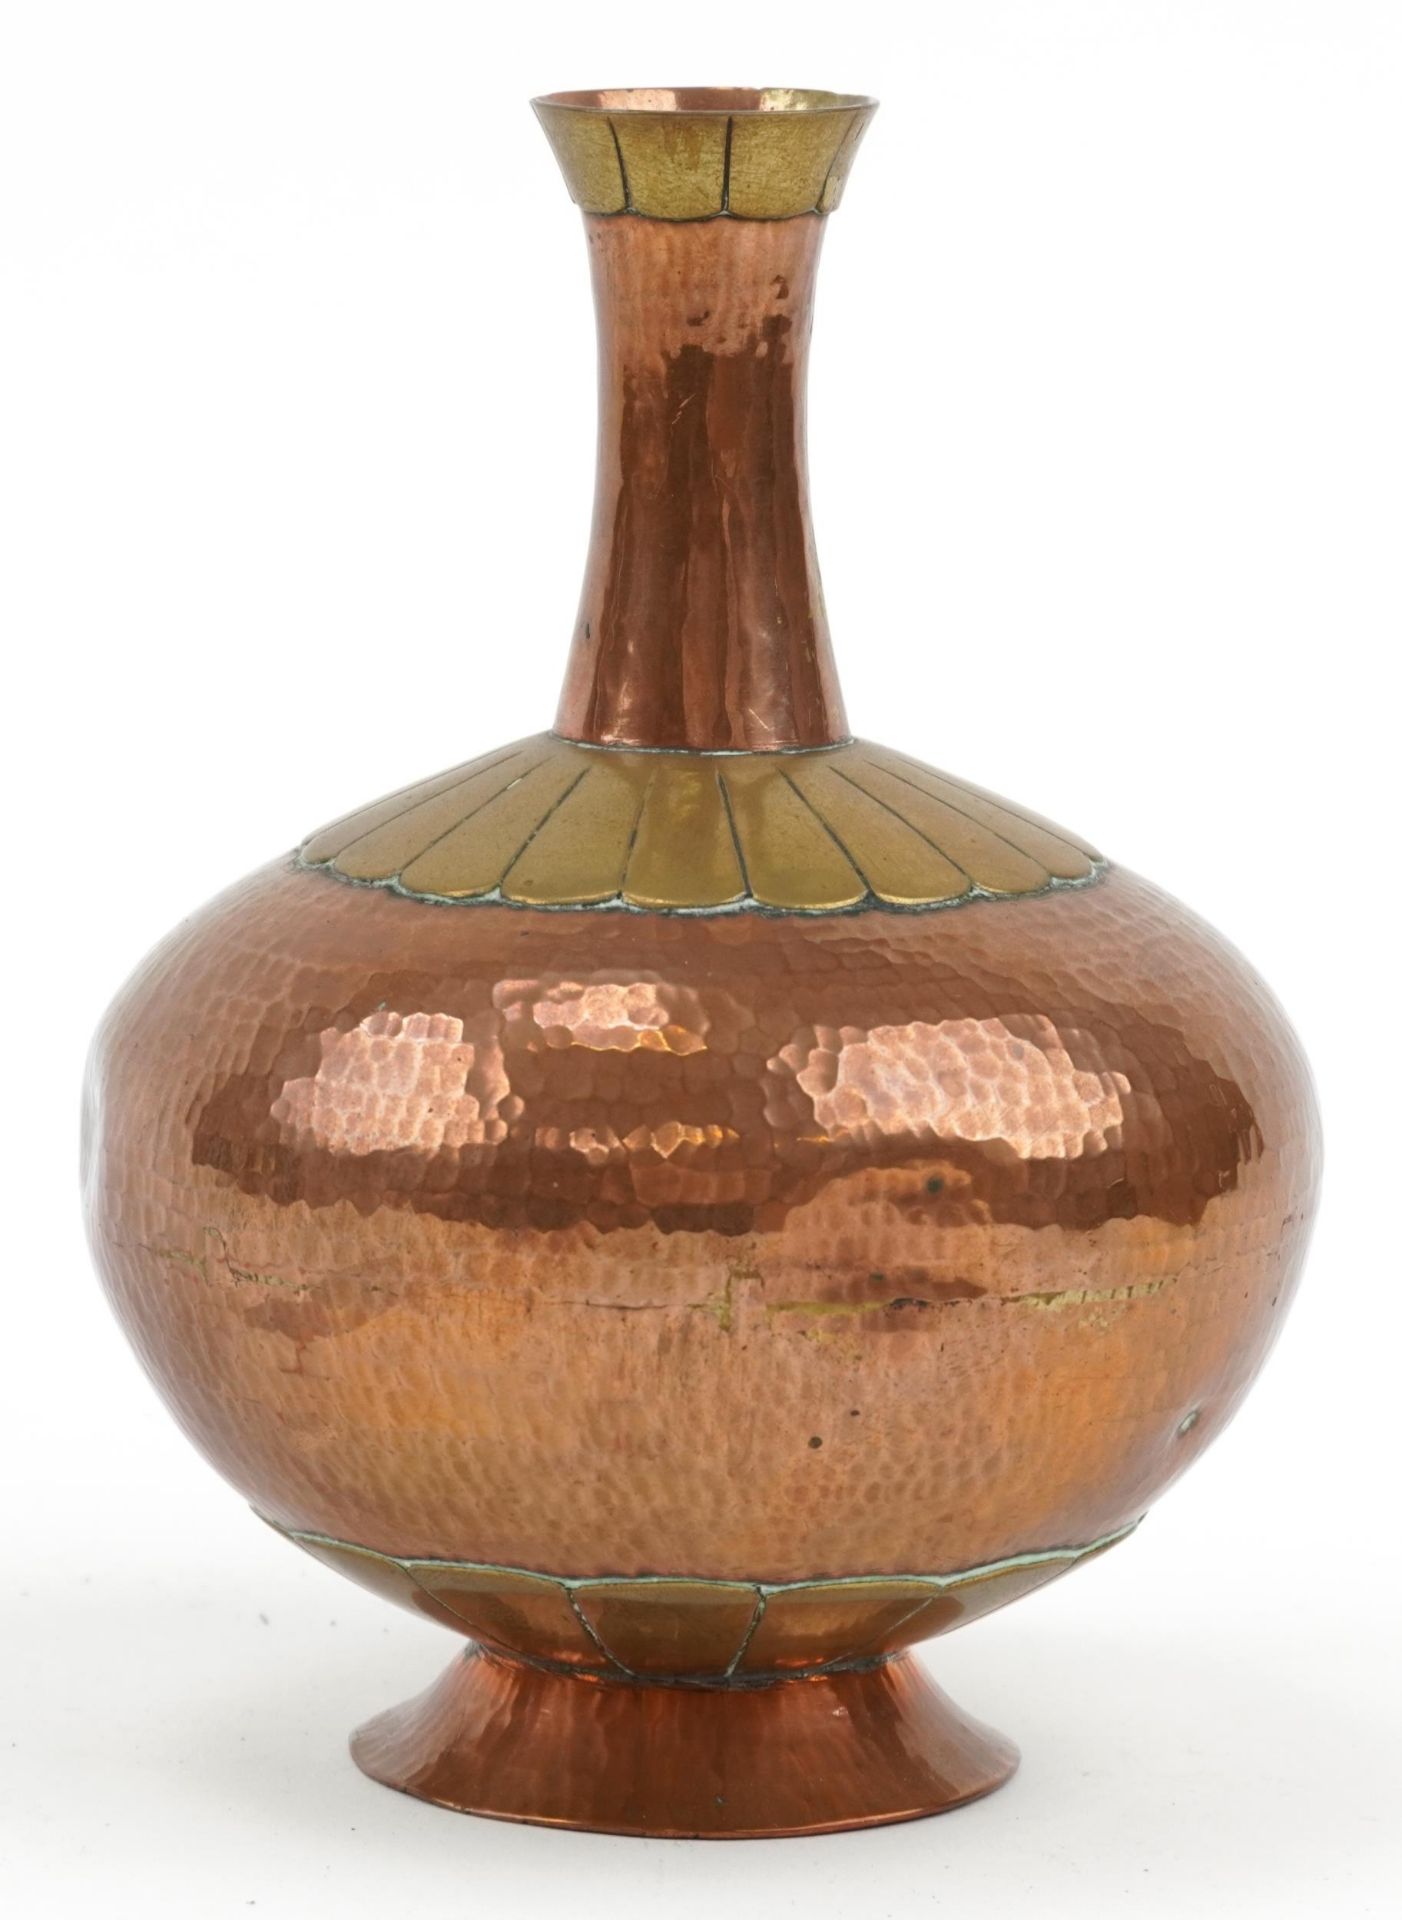 Arts & Crafts style planished copper and brass vase, 15cm high : For further information on this lot